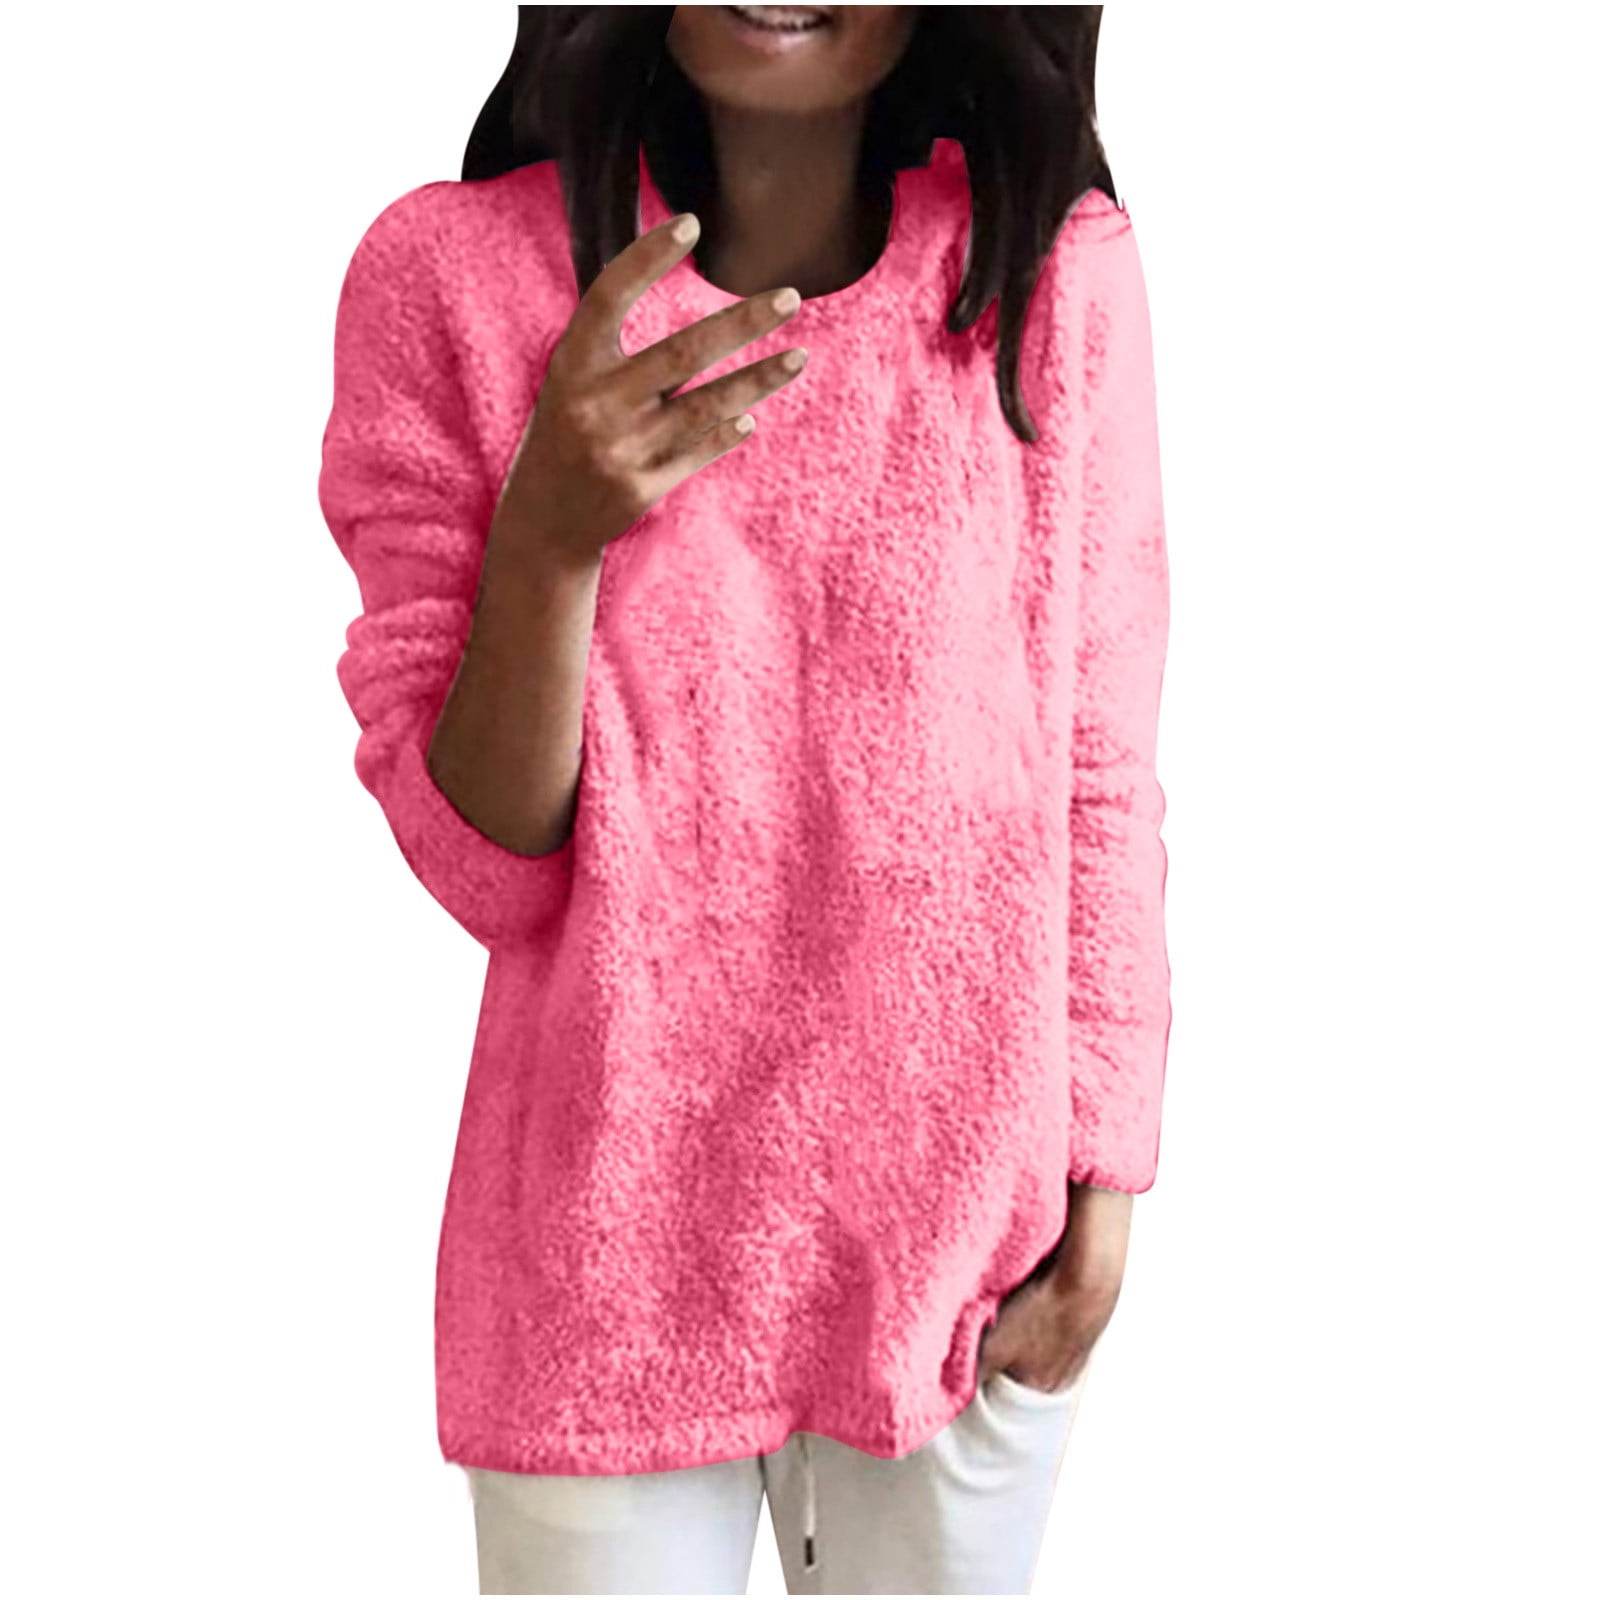 Fleece Tunic Sweater Tops for Women Winter Warm Plus Size Thermal Underwear  Blouses Crew Neck Long Sleeve Pullover (3X-Large, Hot Pink)